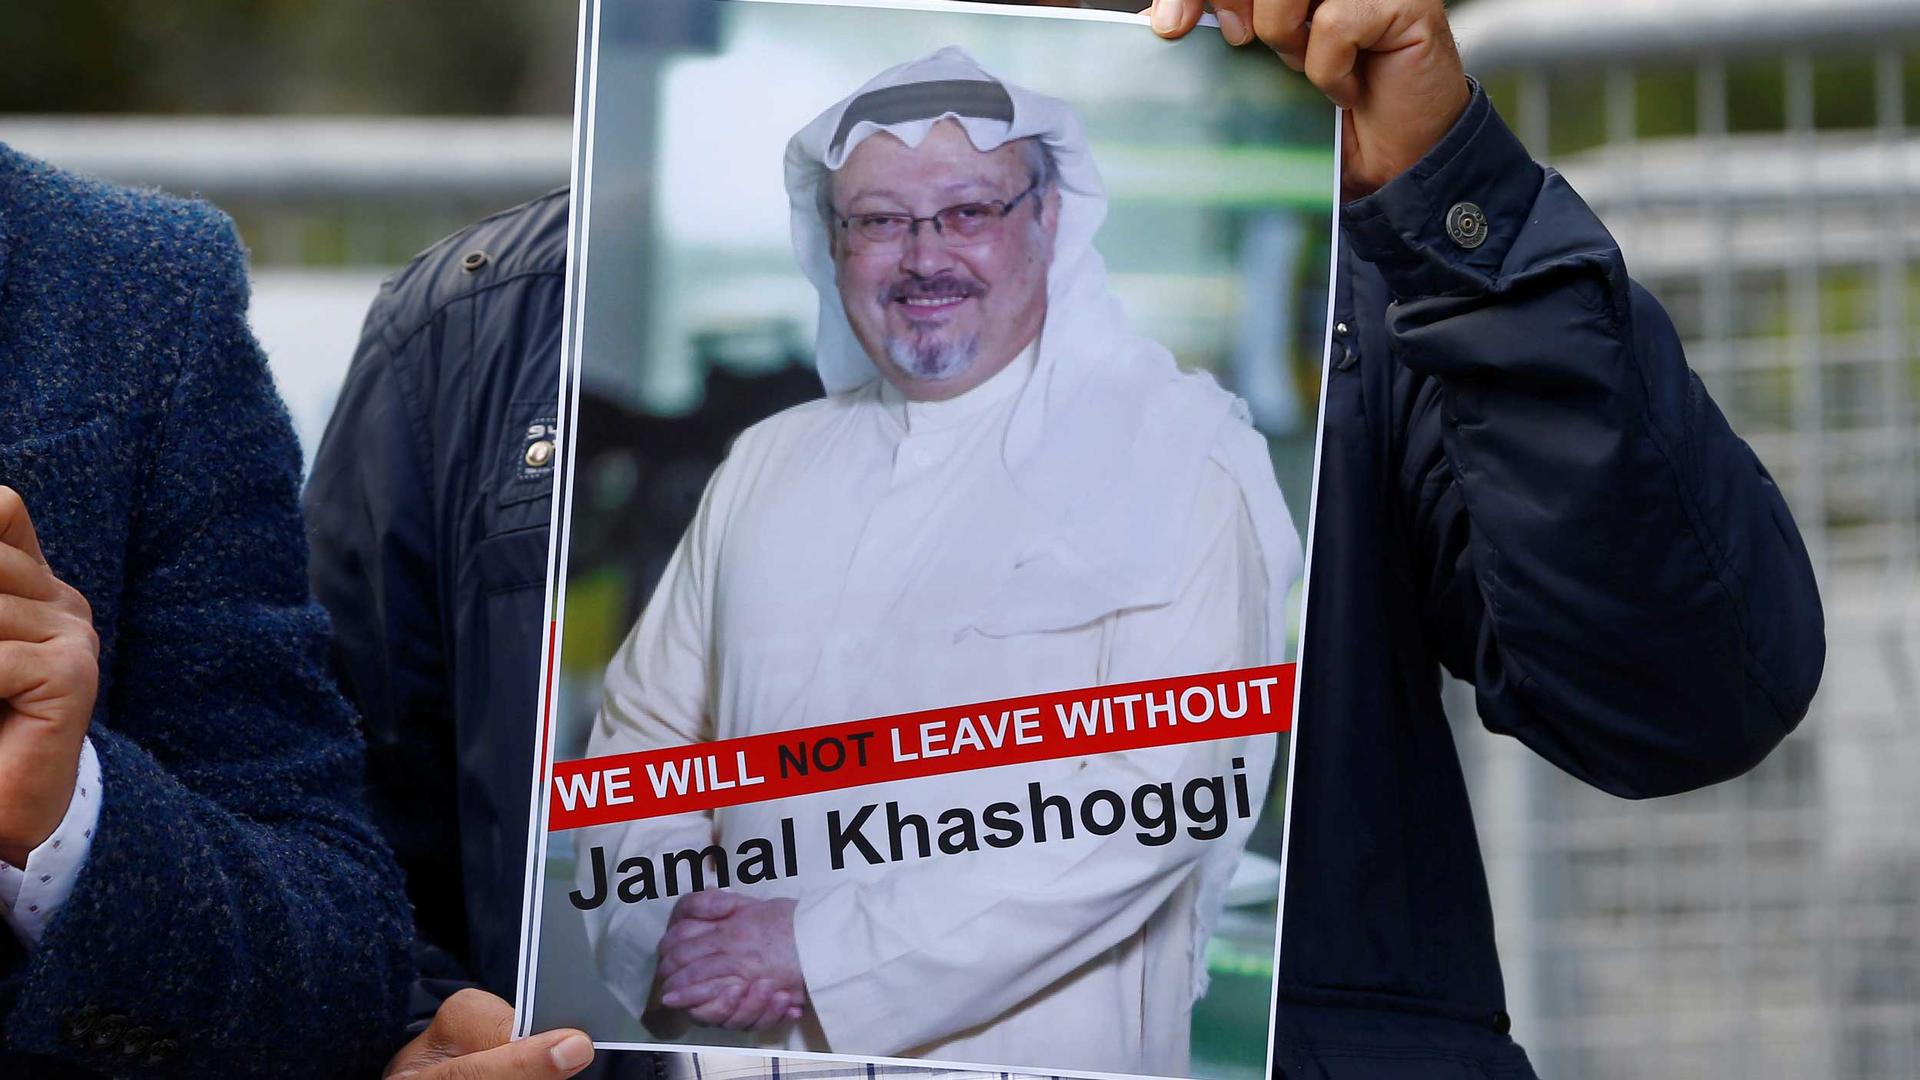 A man holds a sign that says "we will not leave without Jamal Khashoggi"